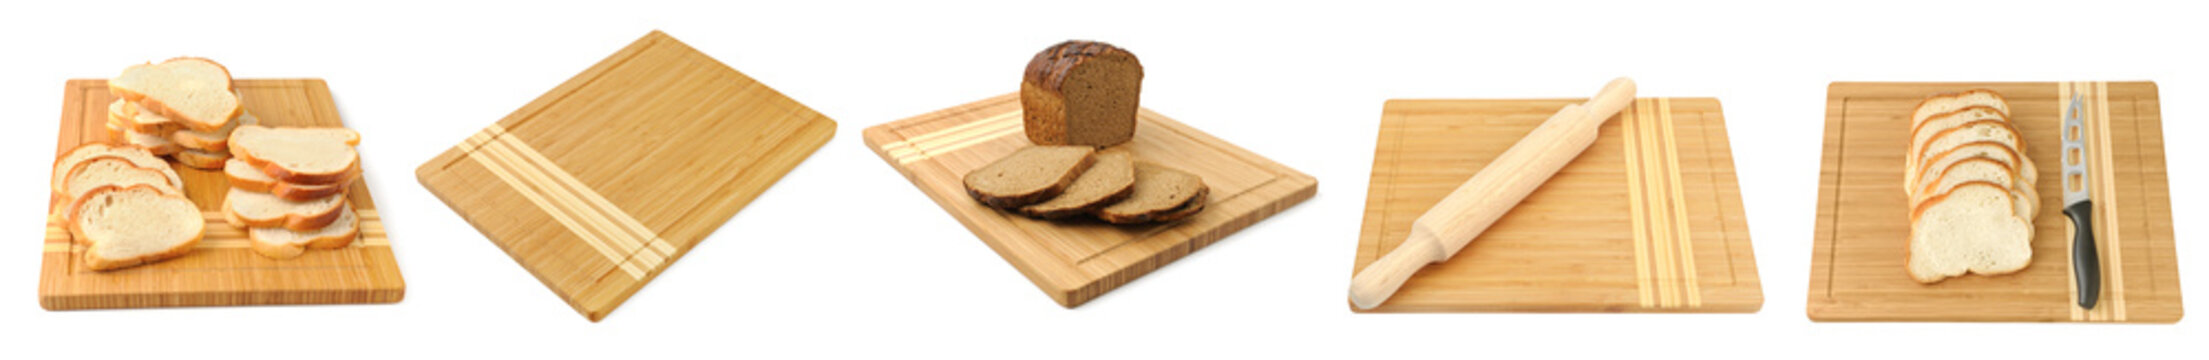 Breadboard for cutting, rolling pin and sliced bread isolated on white background. Panoramic photo.